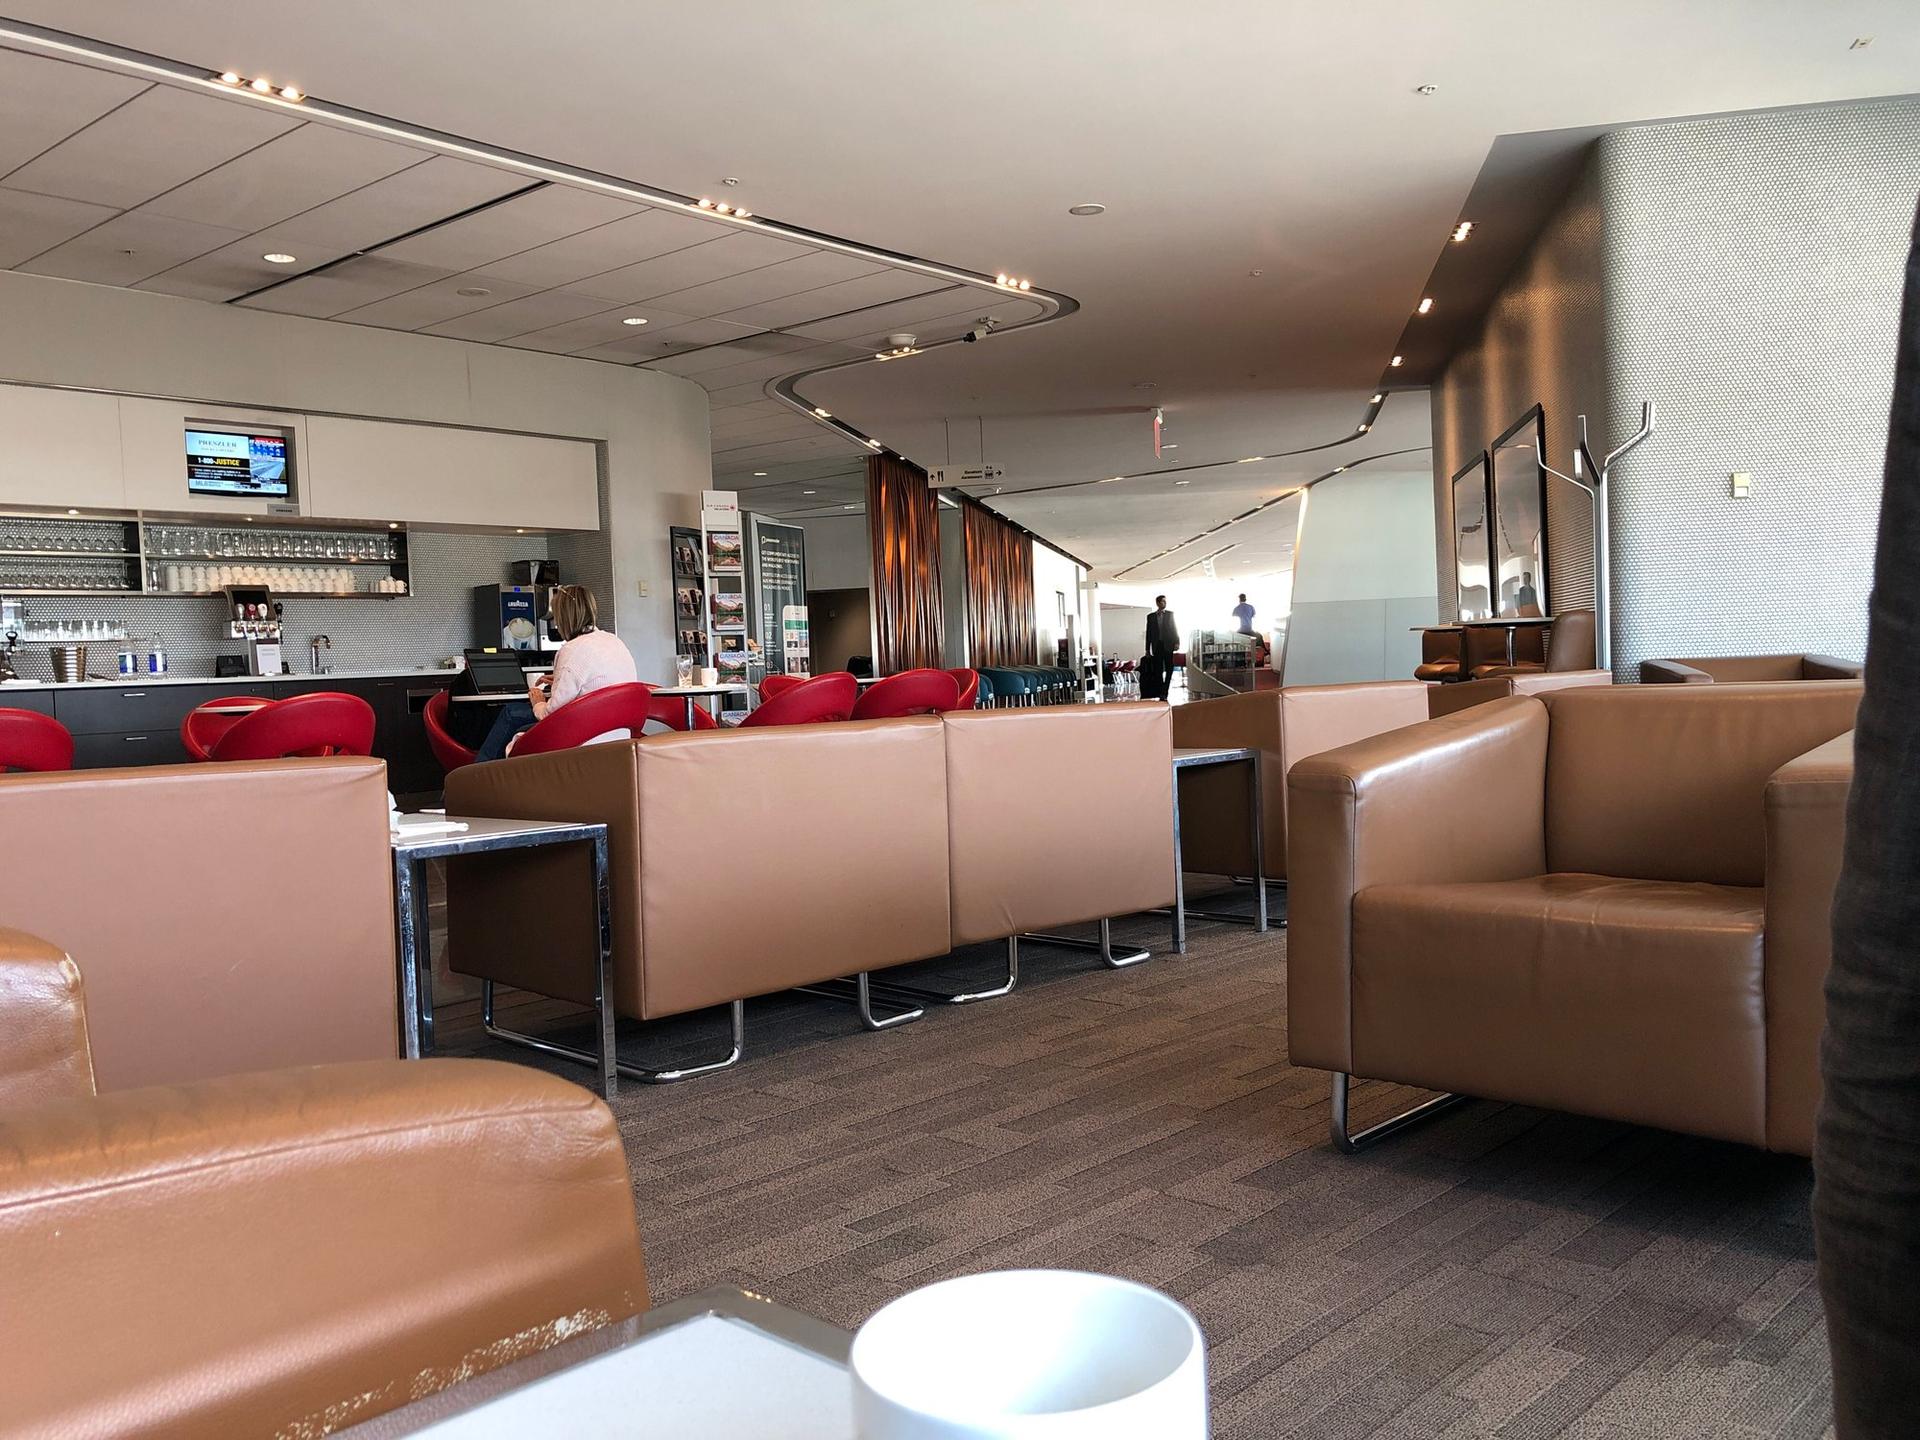 Air Canada Maple Leaf Lounge image 21 of 21